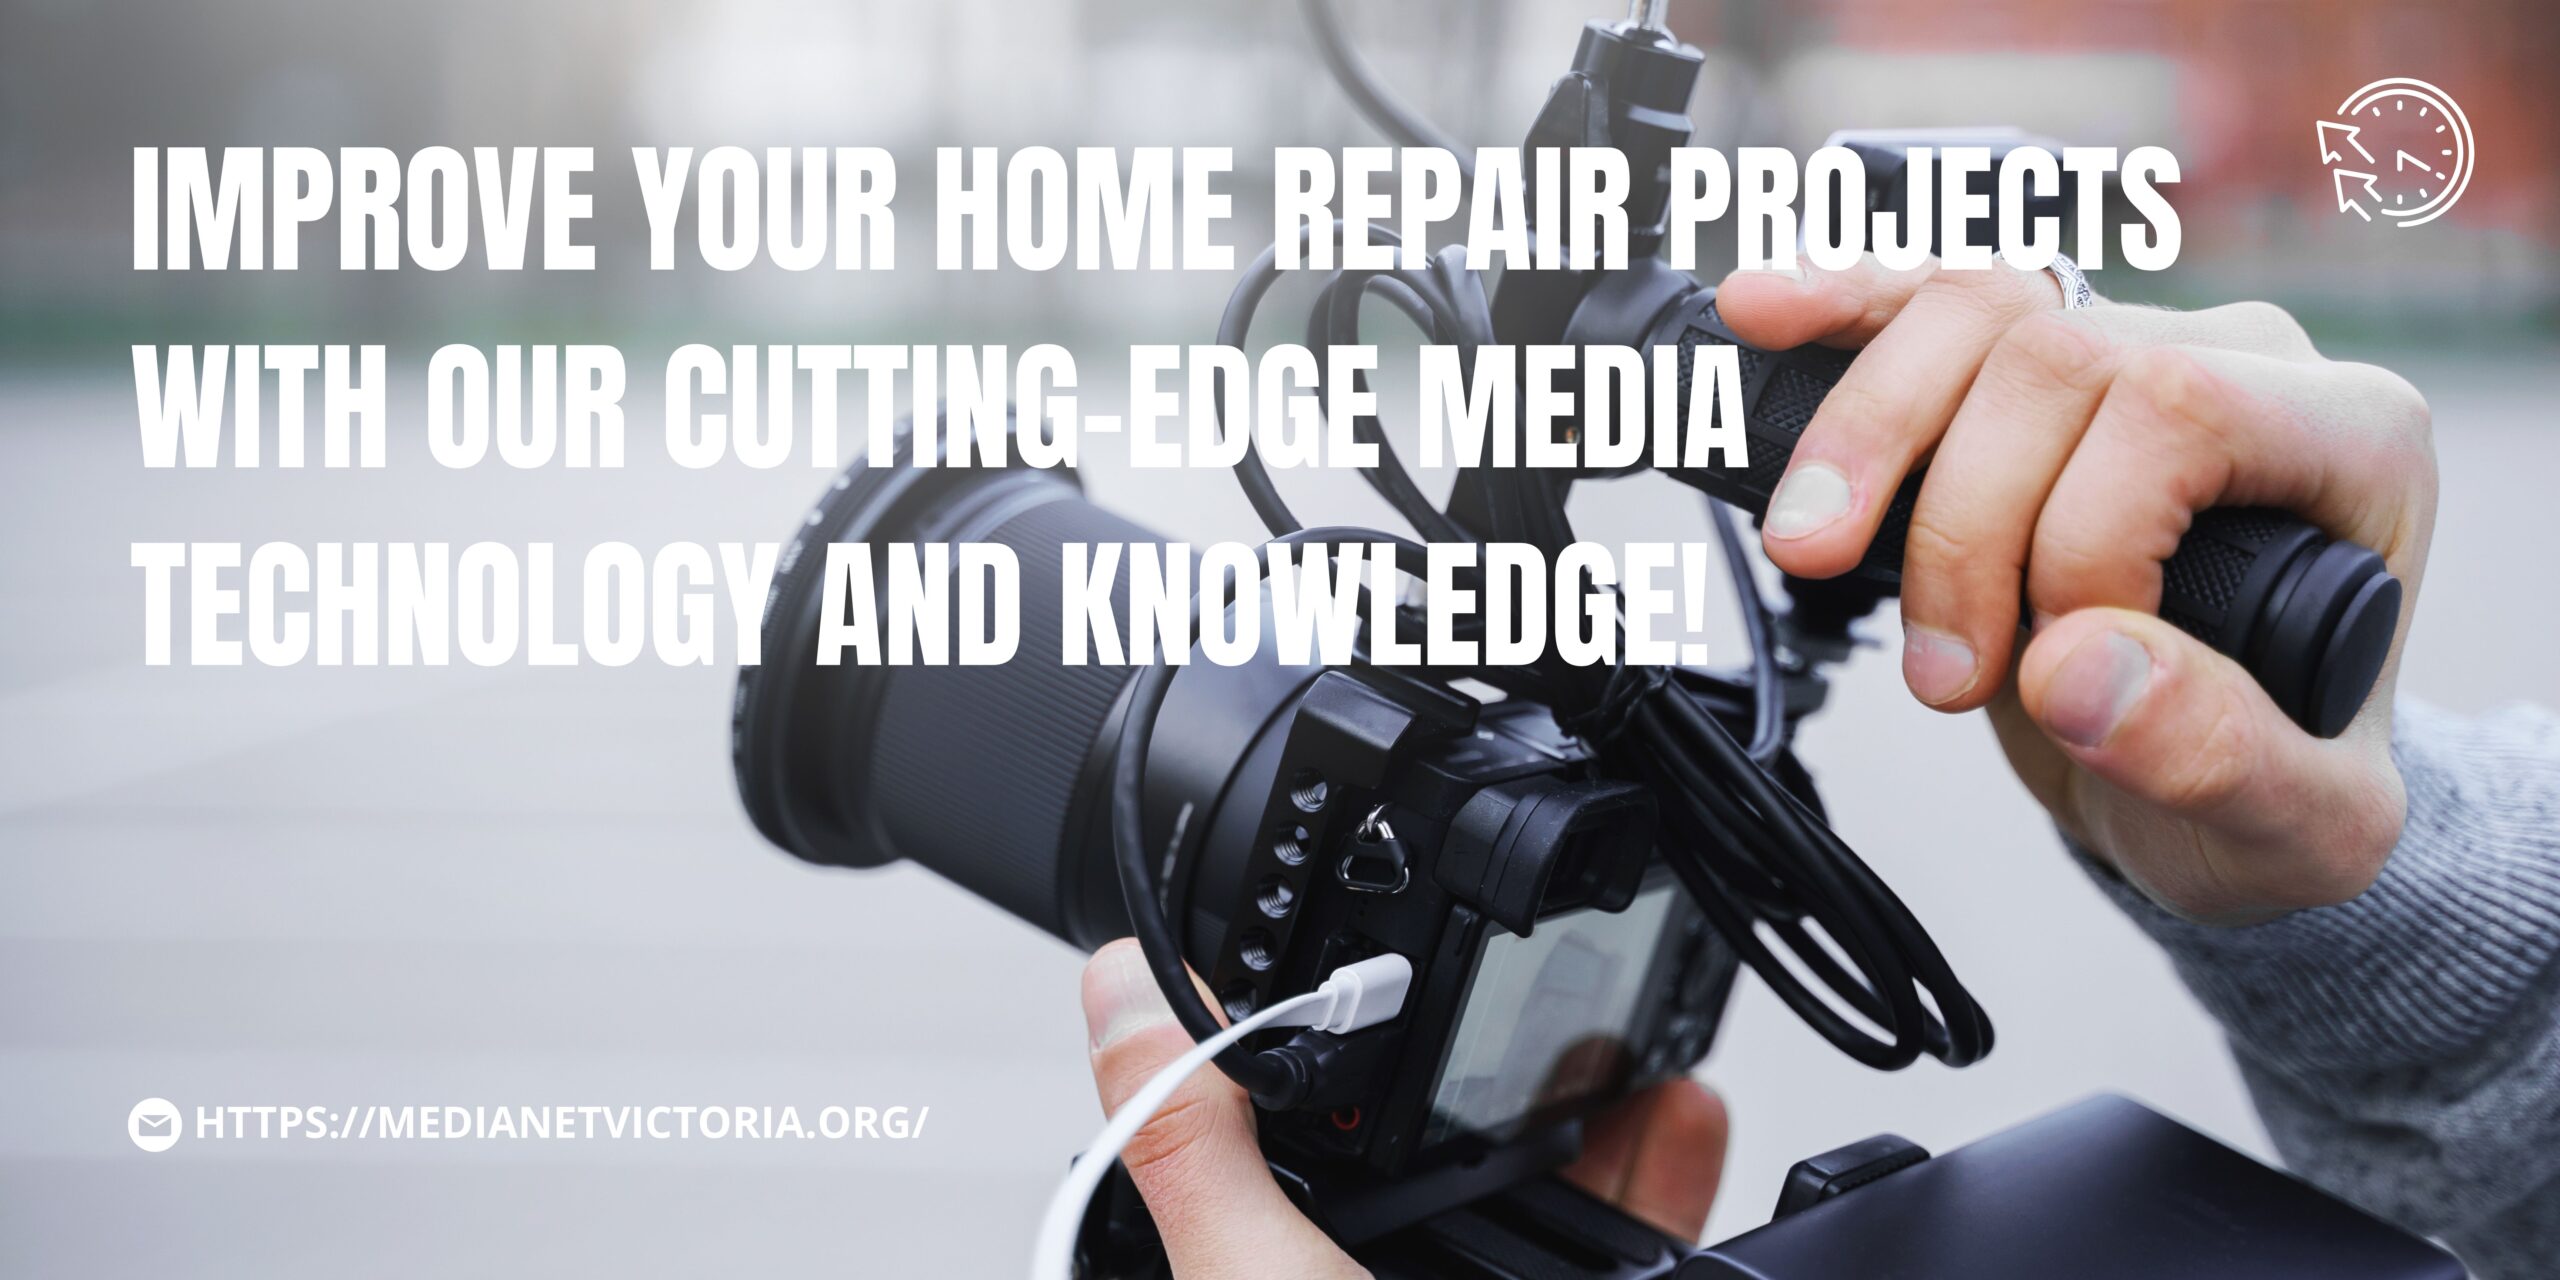 Improve Your Home Repair Projects with Our Cutting-Edge Media Technology and Knowledge!